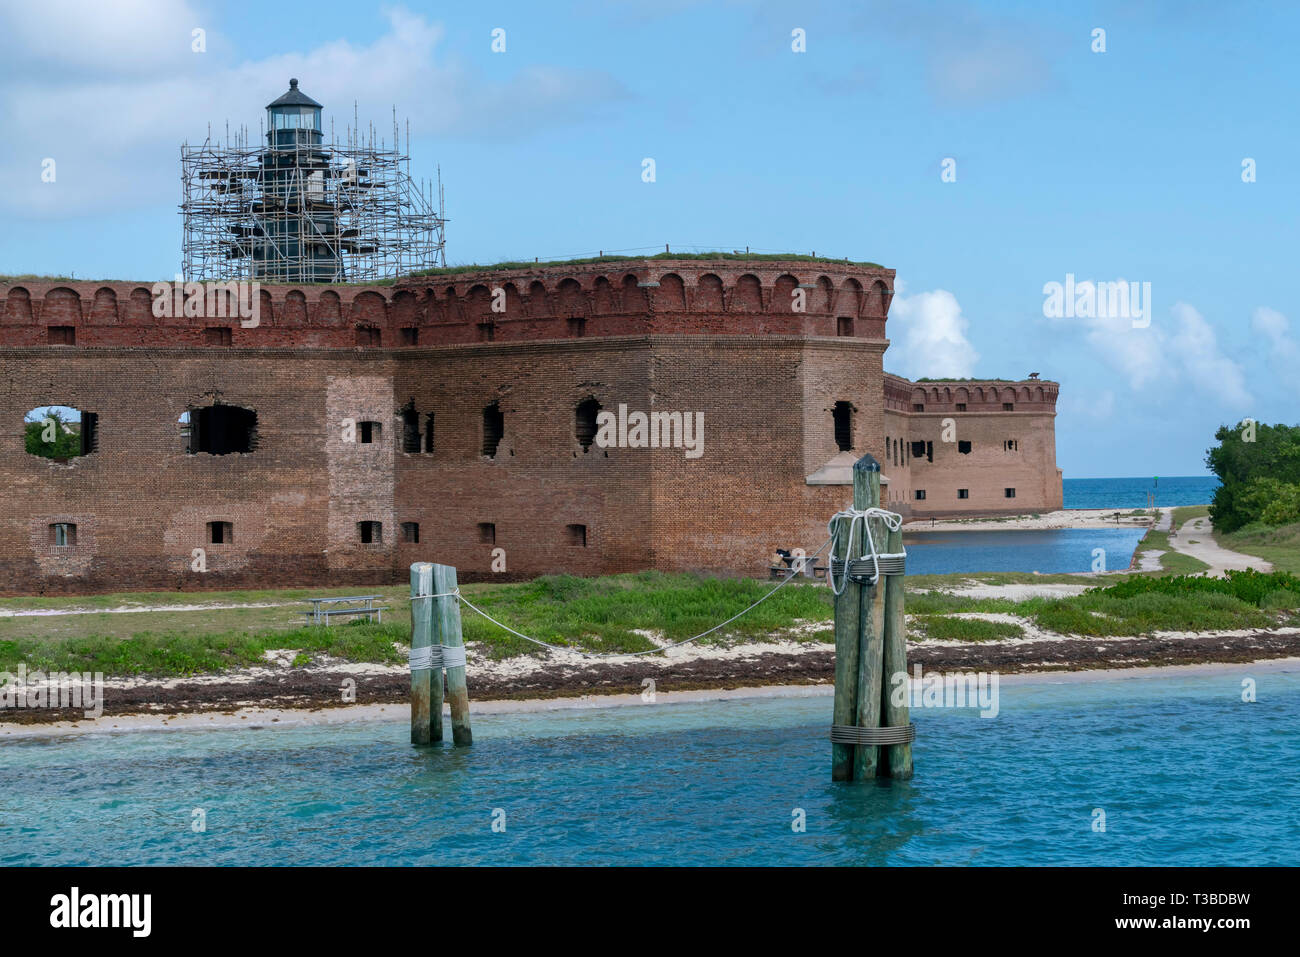 Fort Jefferson, a three-story fortress in Dry Tortugas National Park, is one of the United States' most remote national parks. Located in Florida. Stock Photo